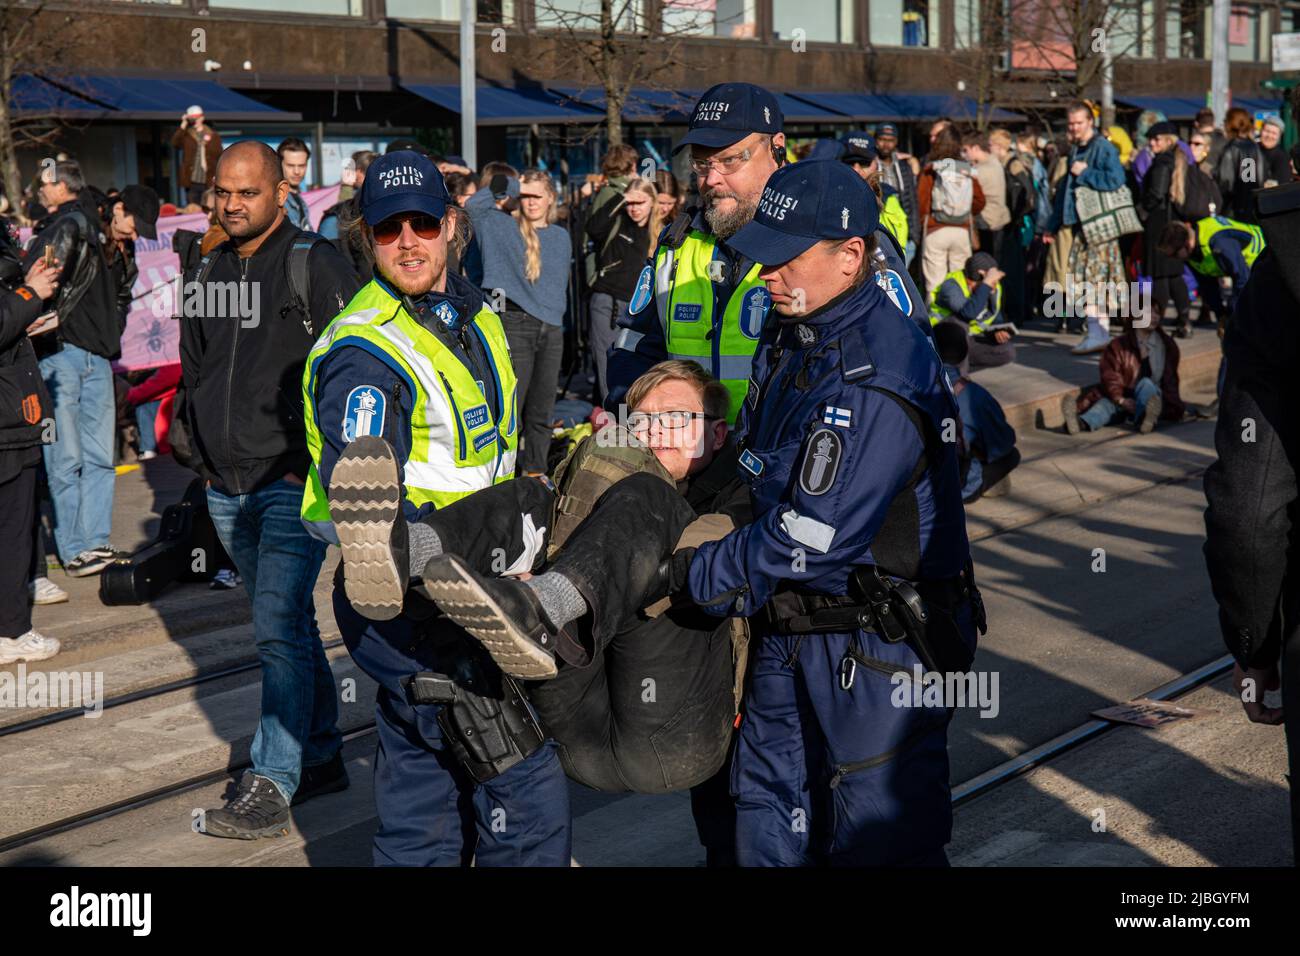 Protester being arrested and carried away by police officers at Elokapina's street blocking demonstration in Mannerheimintie, Helsinki, Finland. Stock Photo